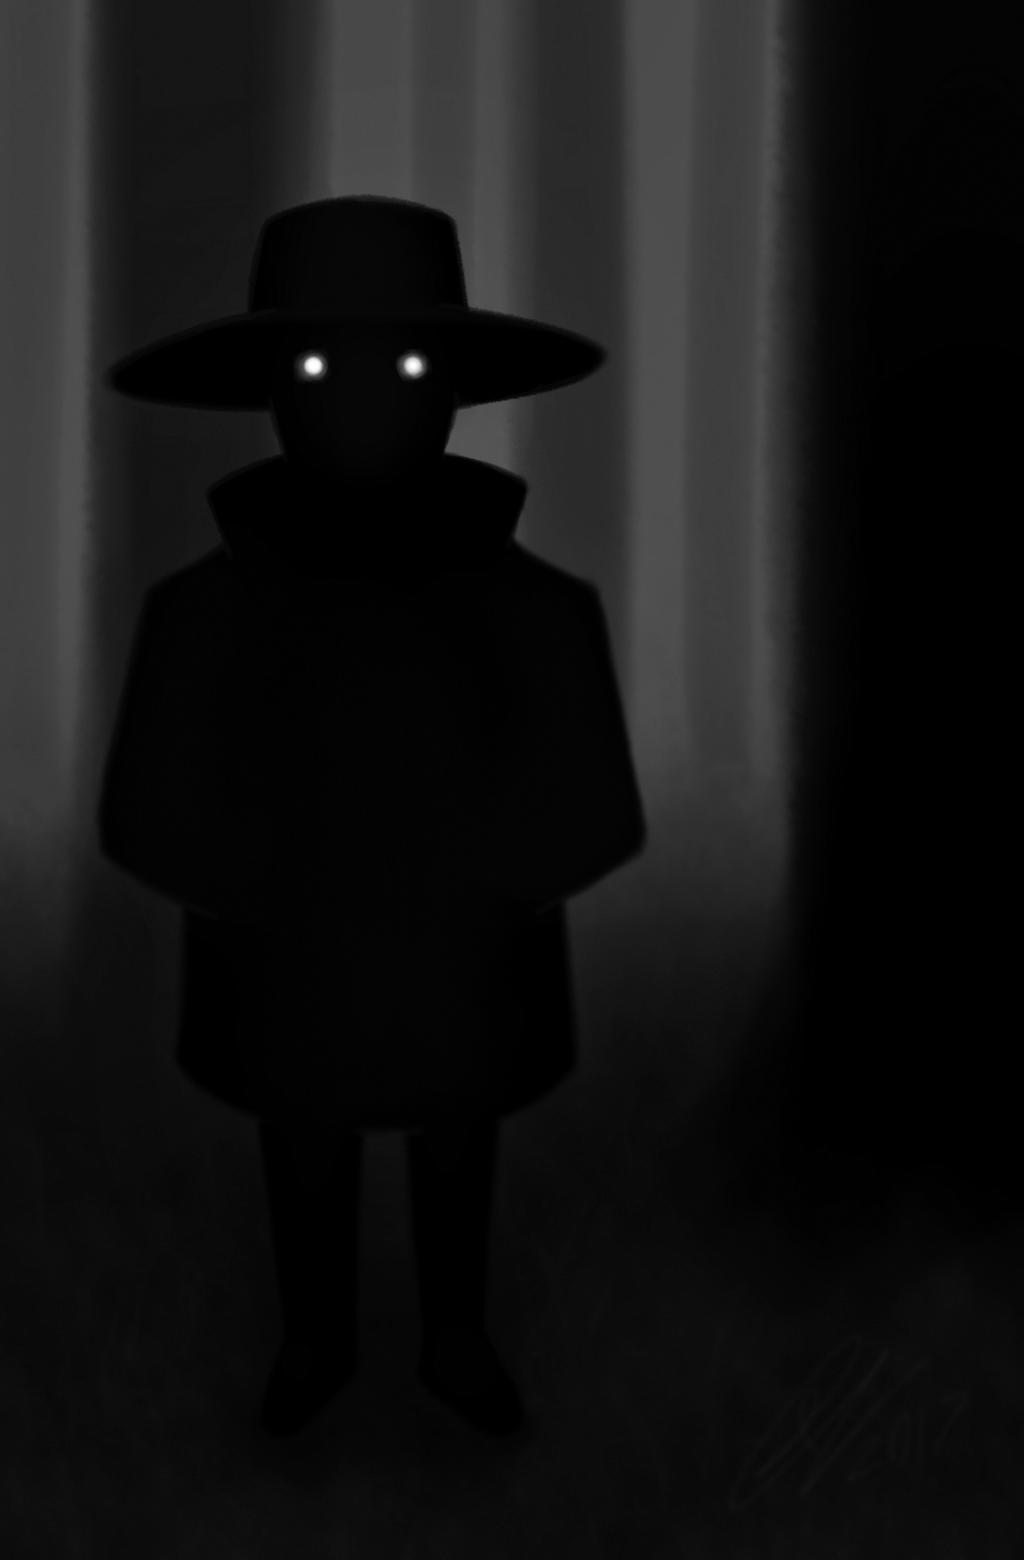 The Hat Man by Leightoons on DeviantArt